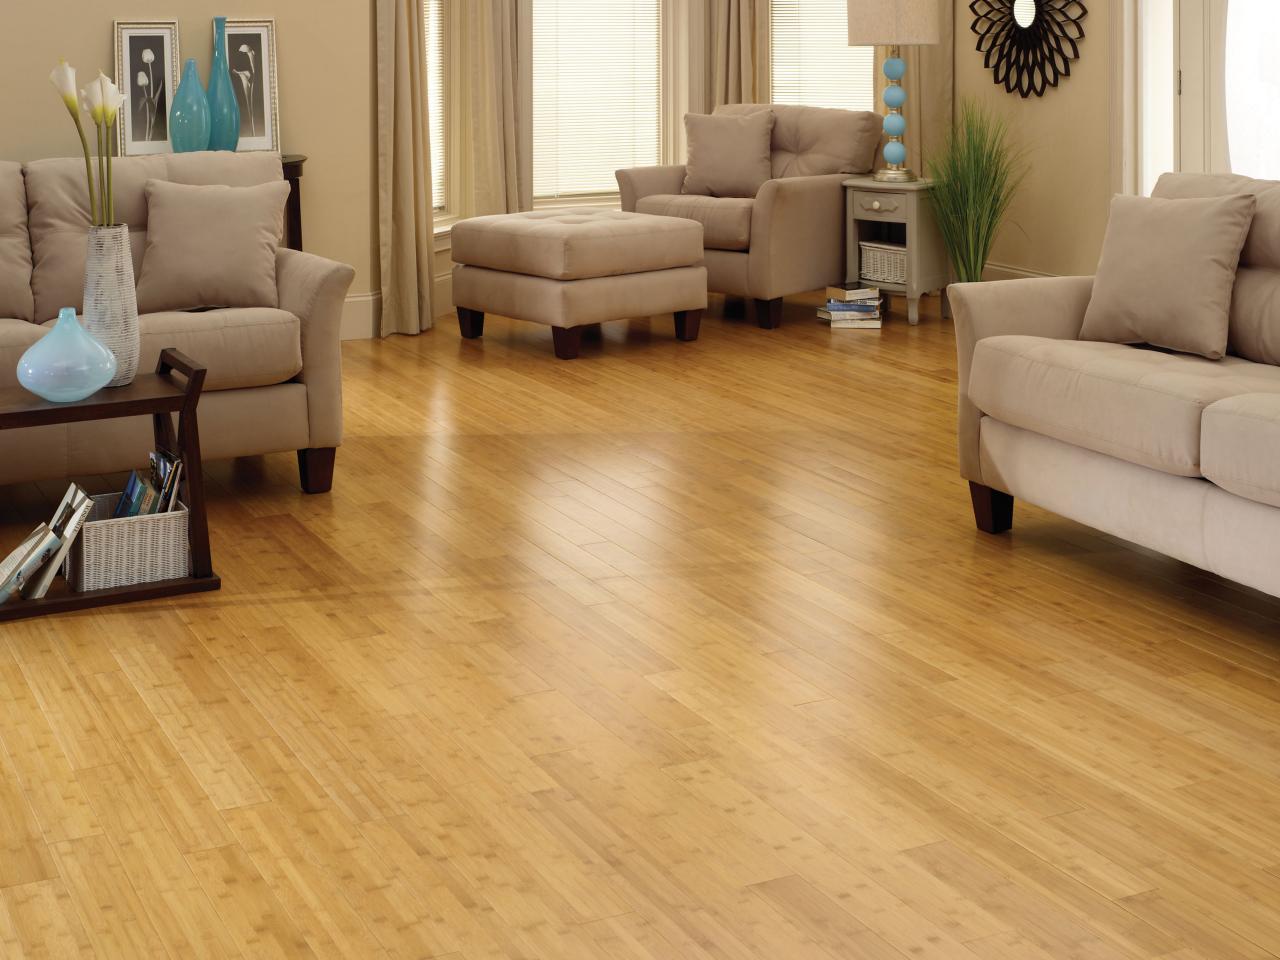 Strong and Durable Flooring in Adelaide will Help You For a Long Time